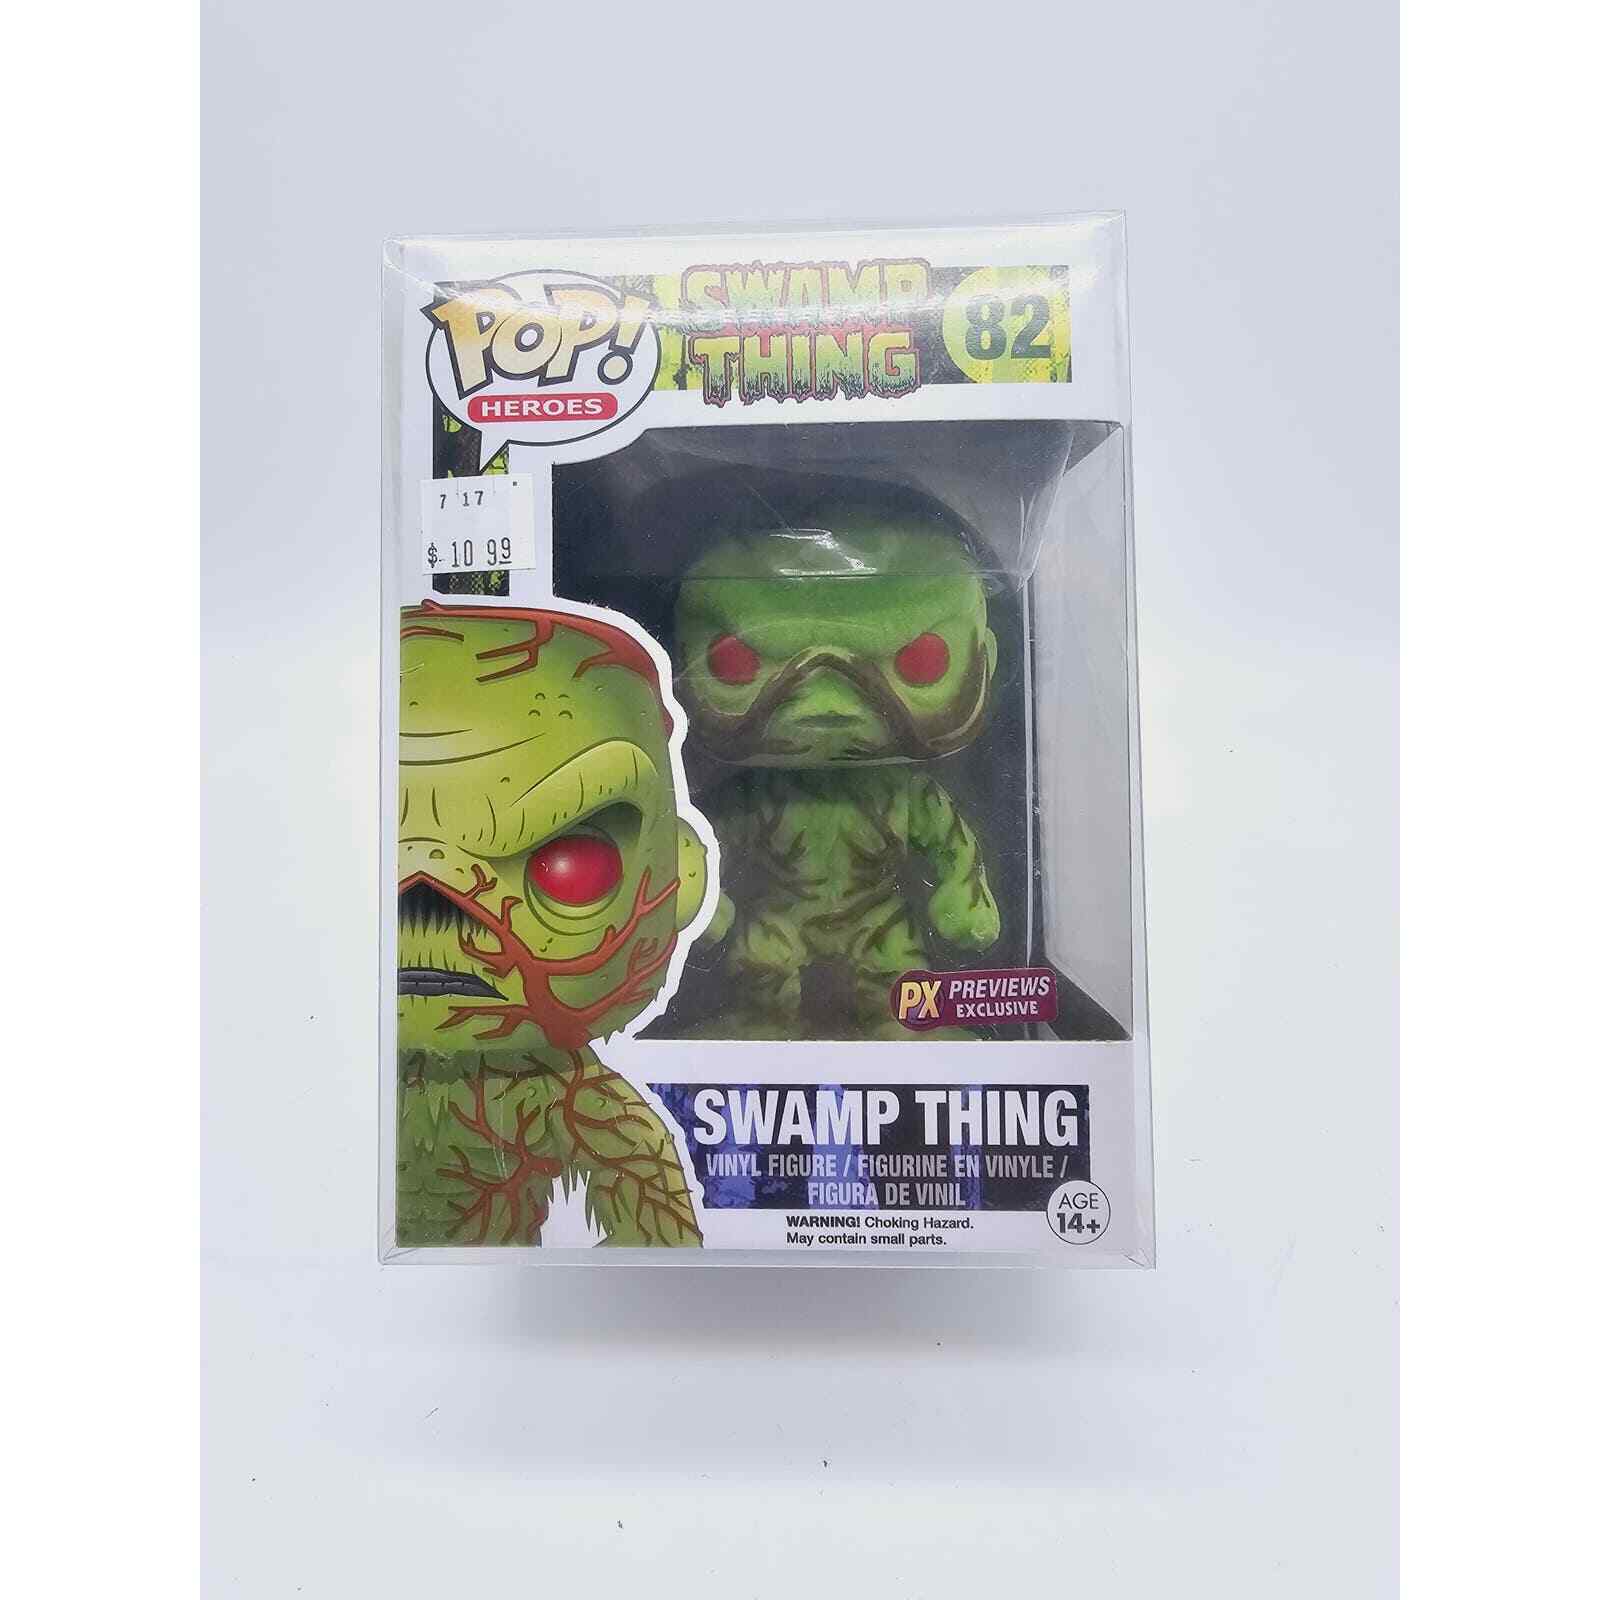 Funko pop #082 Swamp Thing px previews exclusive